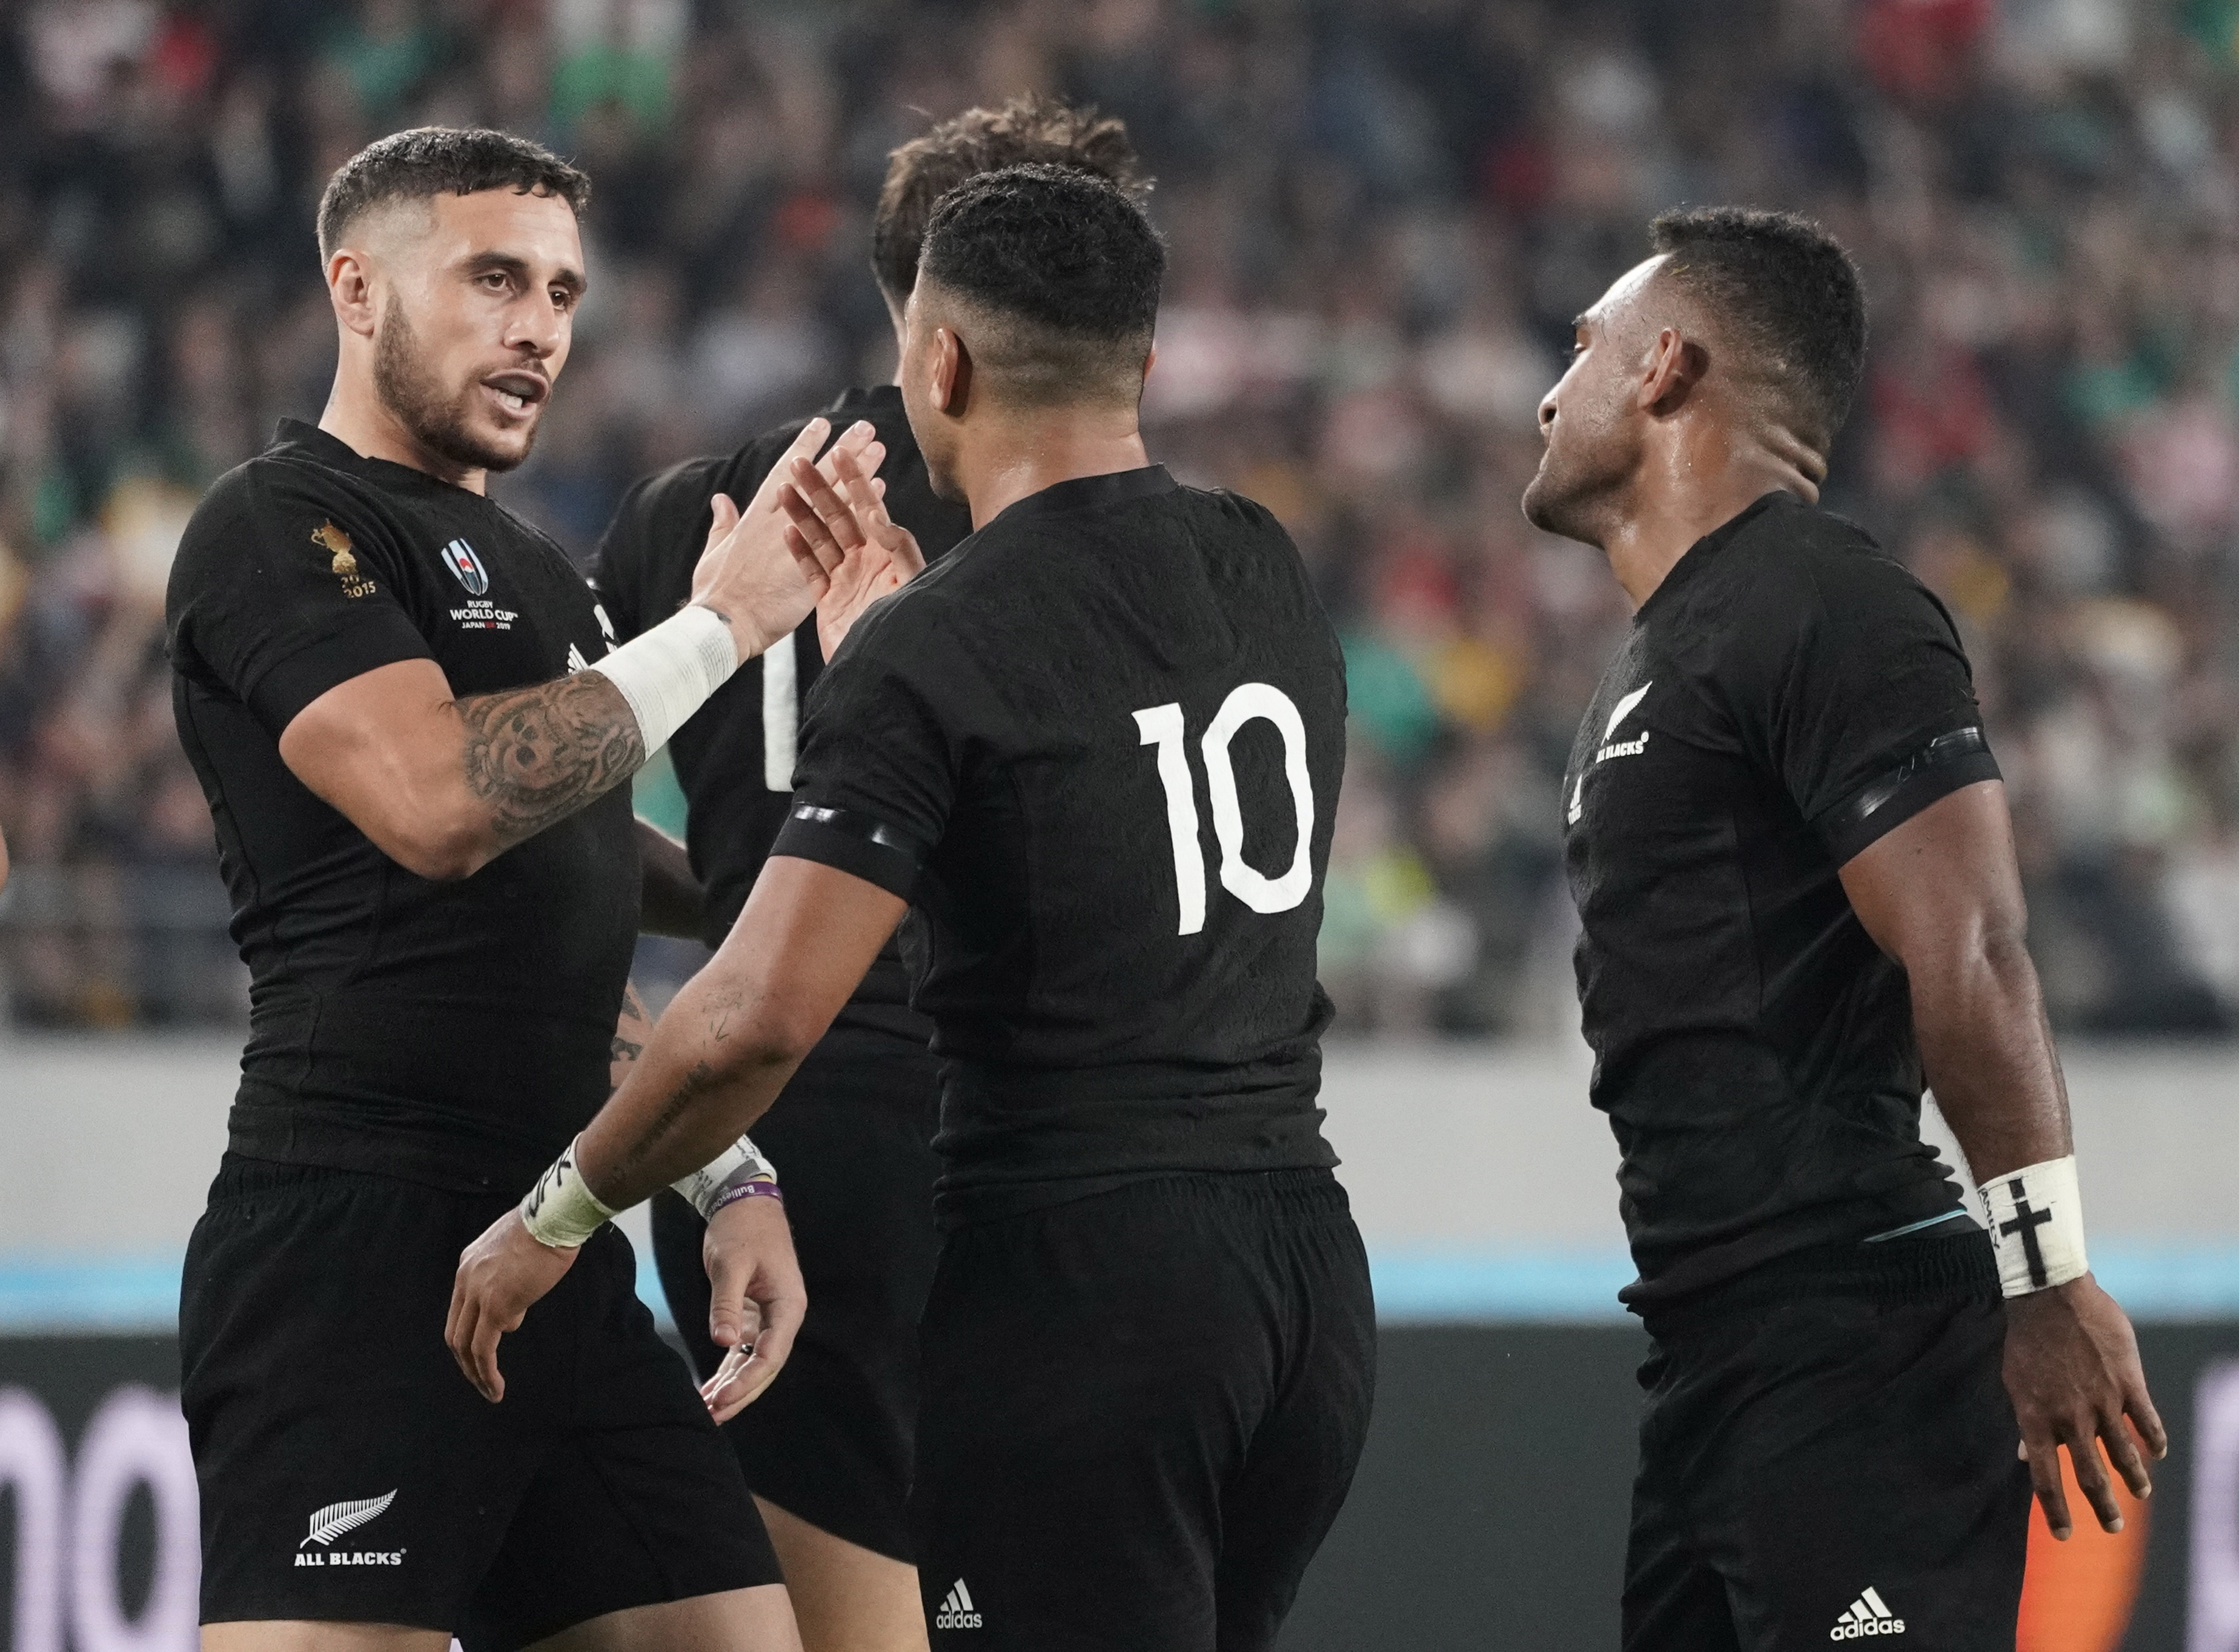 epa07933205 New Zealand's Richie Mo'unga (C) and Sevu Reece (R) celebrate scoring a try during the Rugby World Cup quarter final match between New Zealand and Ireland played in the Tokyo Stadium, Tokyo, Japan, 19 October 2019.  EPA/FRANCK ROBICHON EDITORIAL USE ONLY/ NO COMMERCIAL SALES / NOT USED IN ASSOCATION WITH ANY COMMERCIAL ENTITY